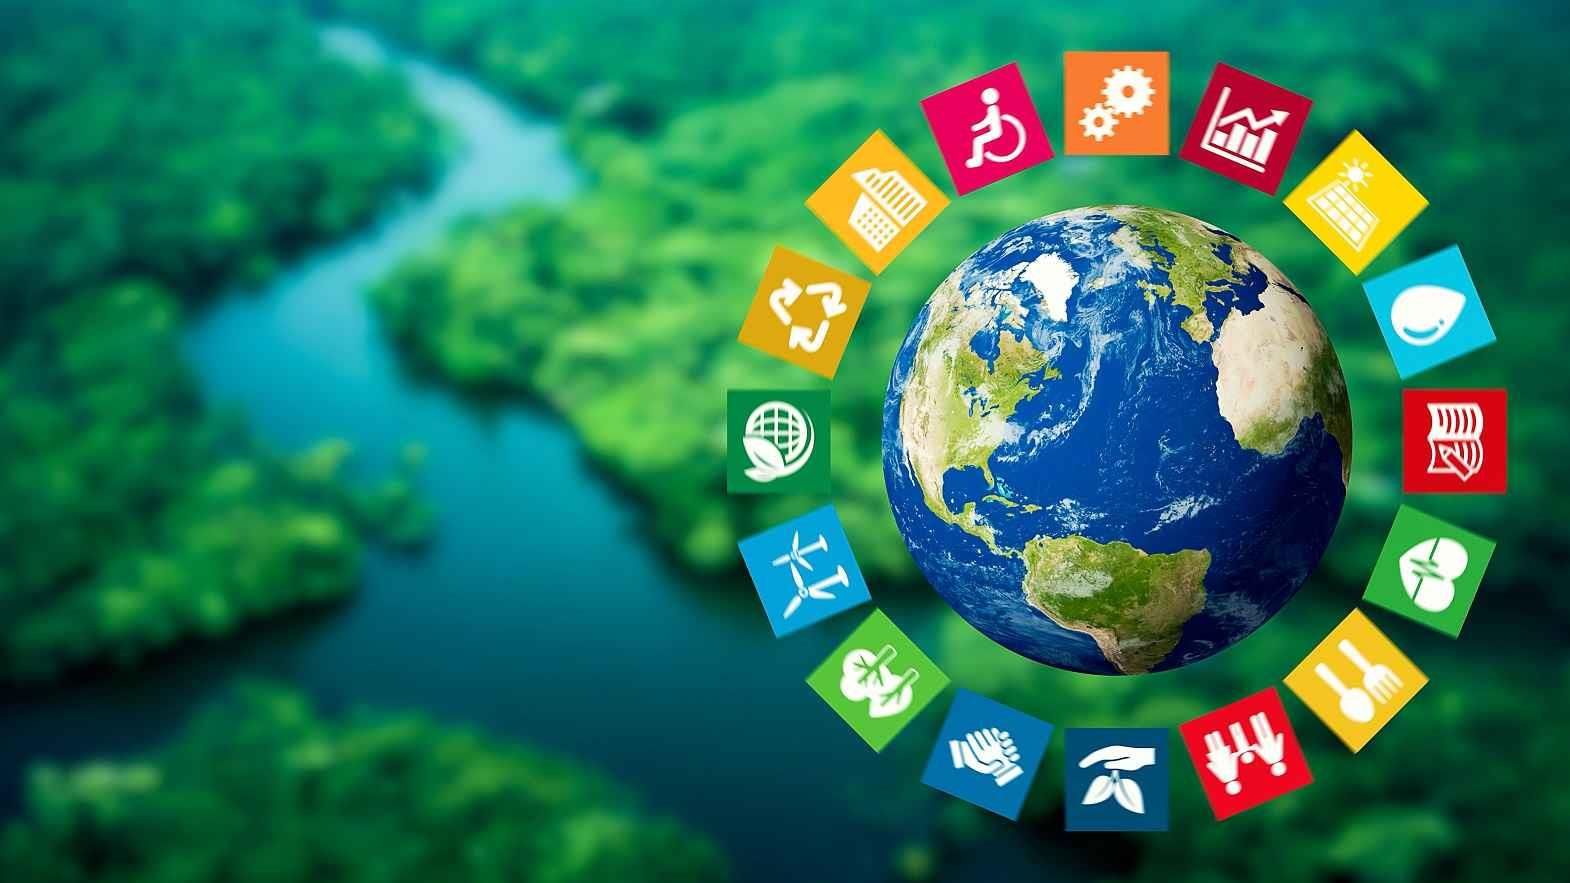 Role of Circularity in Textile Industry in Achieving UN SDGs